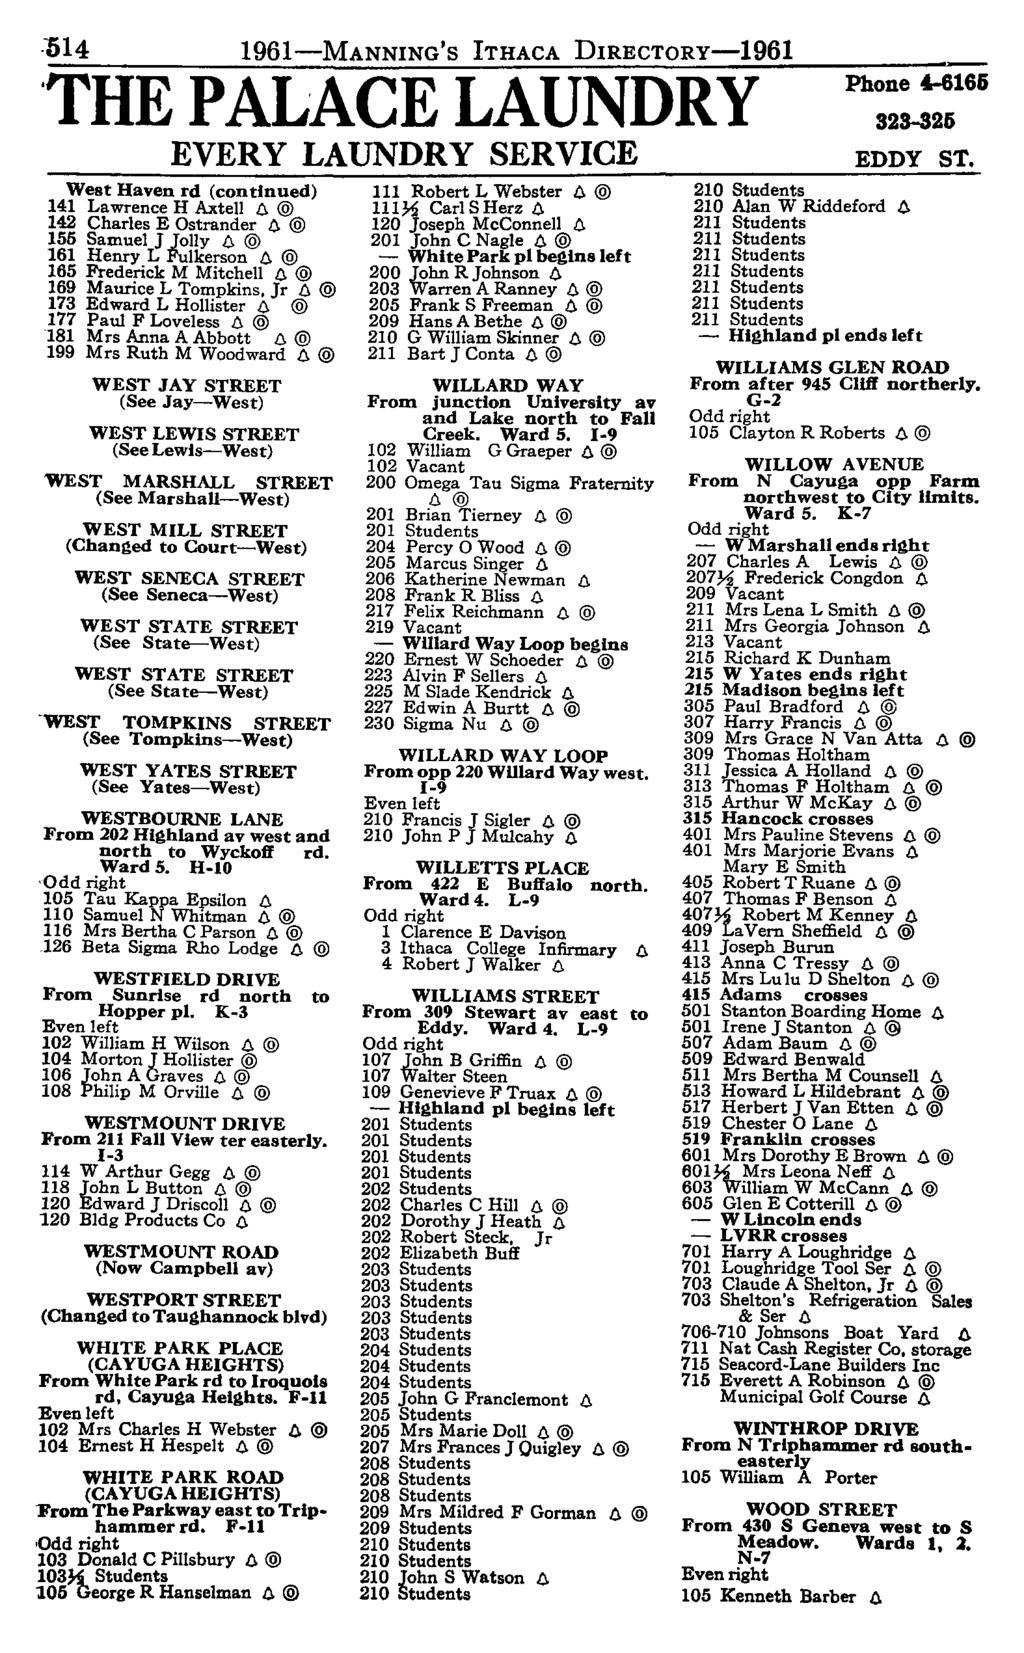 1)14 1961-MANNING'S ITHACA DIRECTORy-1961 'THE PALACE LAUNDRY EVERY LAUNDRY SERVICE West Haven rd (continued) 141 Lawrence H Axtell l), 142 Charles E Ostrander l), 155 Samuel I Jolly l), 161 Henry L